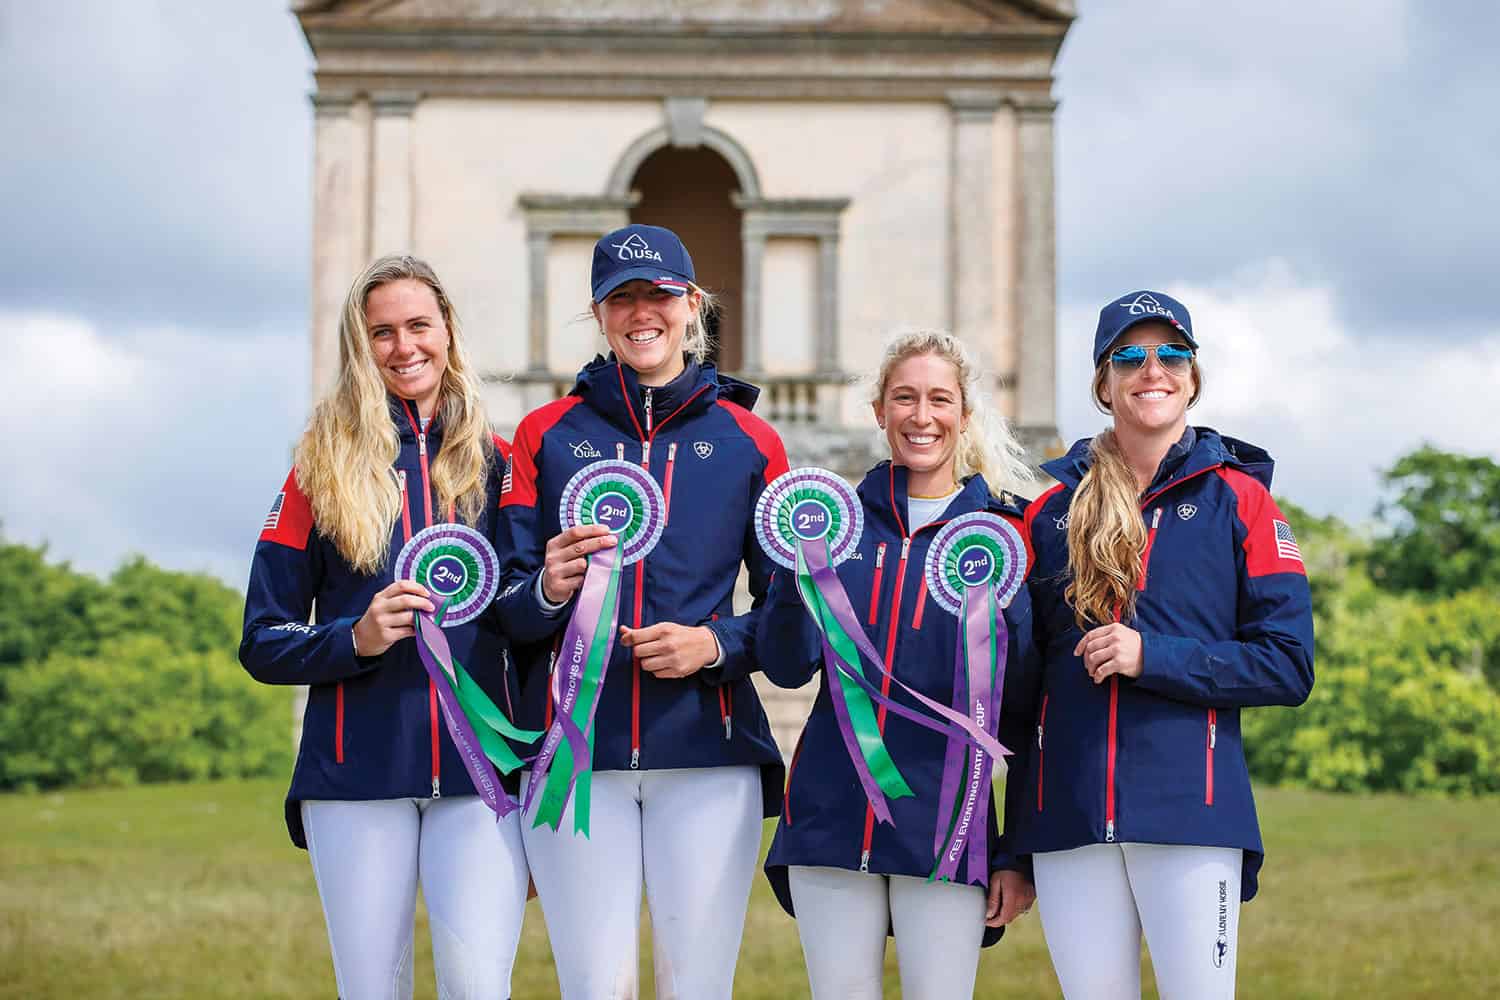 U.S. Eventing Team Secures Silver at 2022 FEI Eventing Nations Cup Great Britain CCIO4*-S